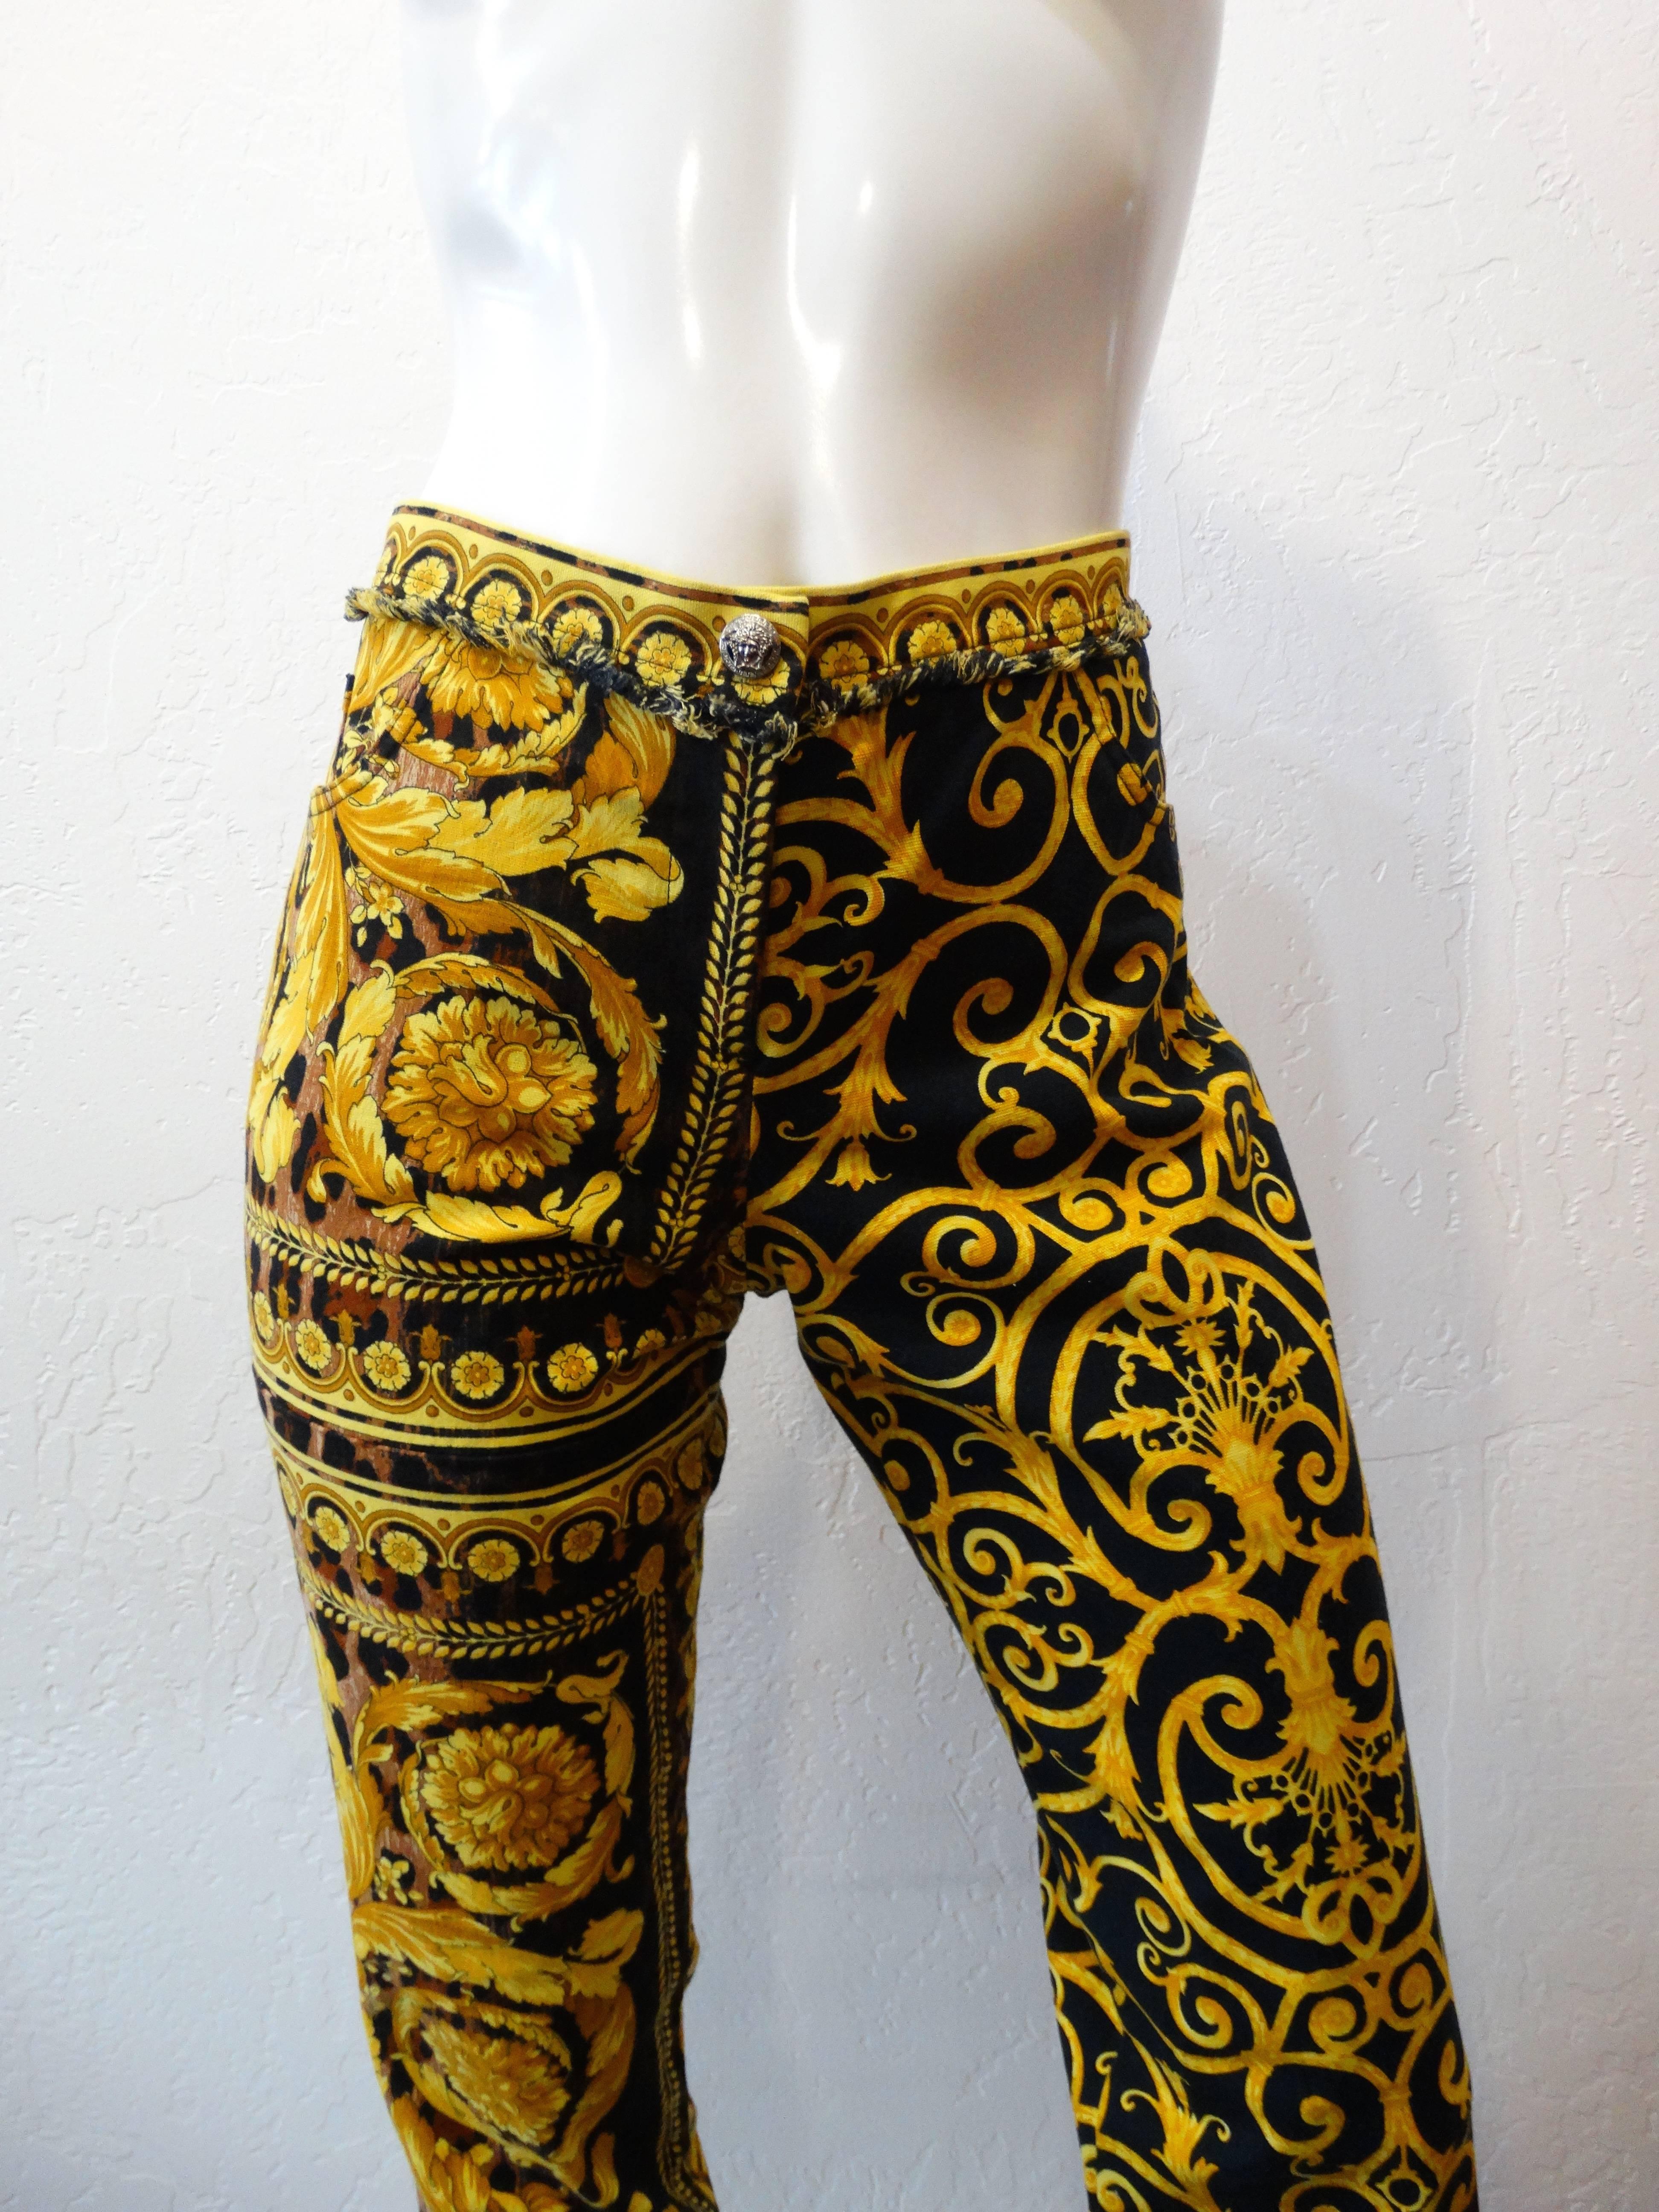 Doesn't get any more Versace than this print! Amazing 1990s Versace Baroque printed pants! Black and gold swirling print with an underlay of leopard print. High rise fit with slightly flared leg. Zips up the front and buttons at the waist. Trimmed